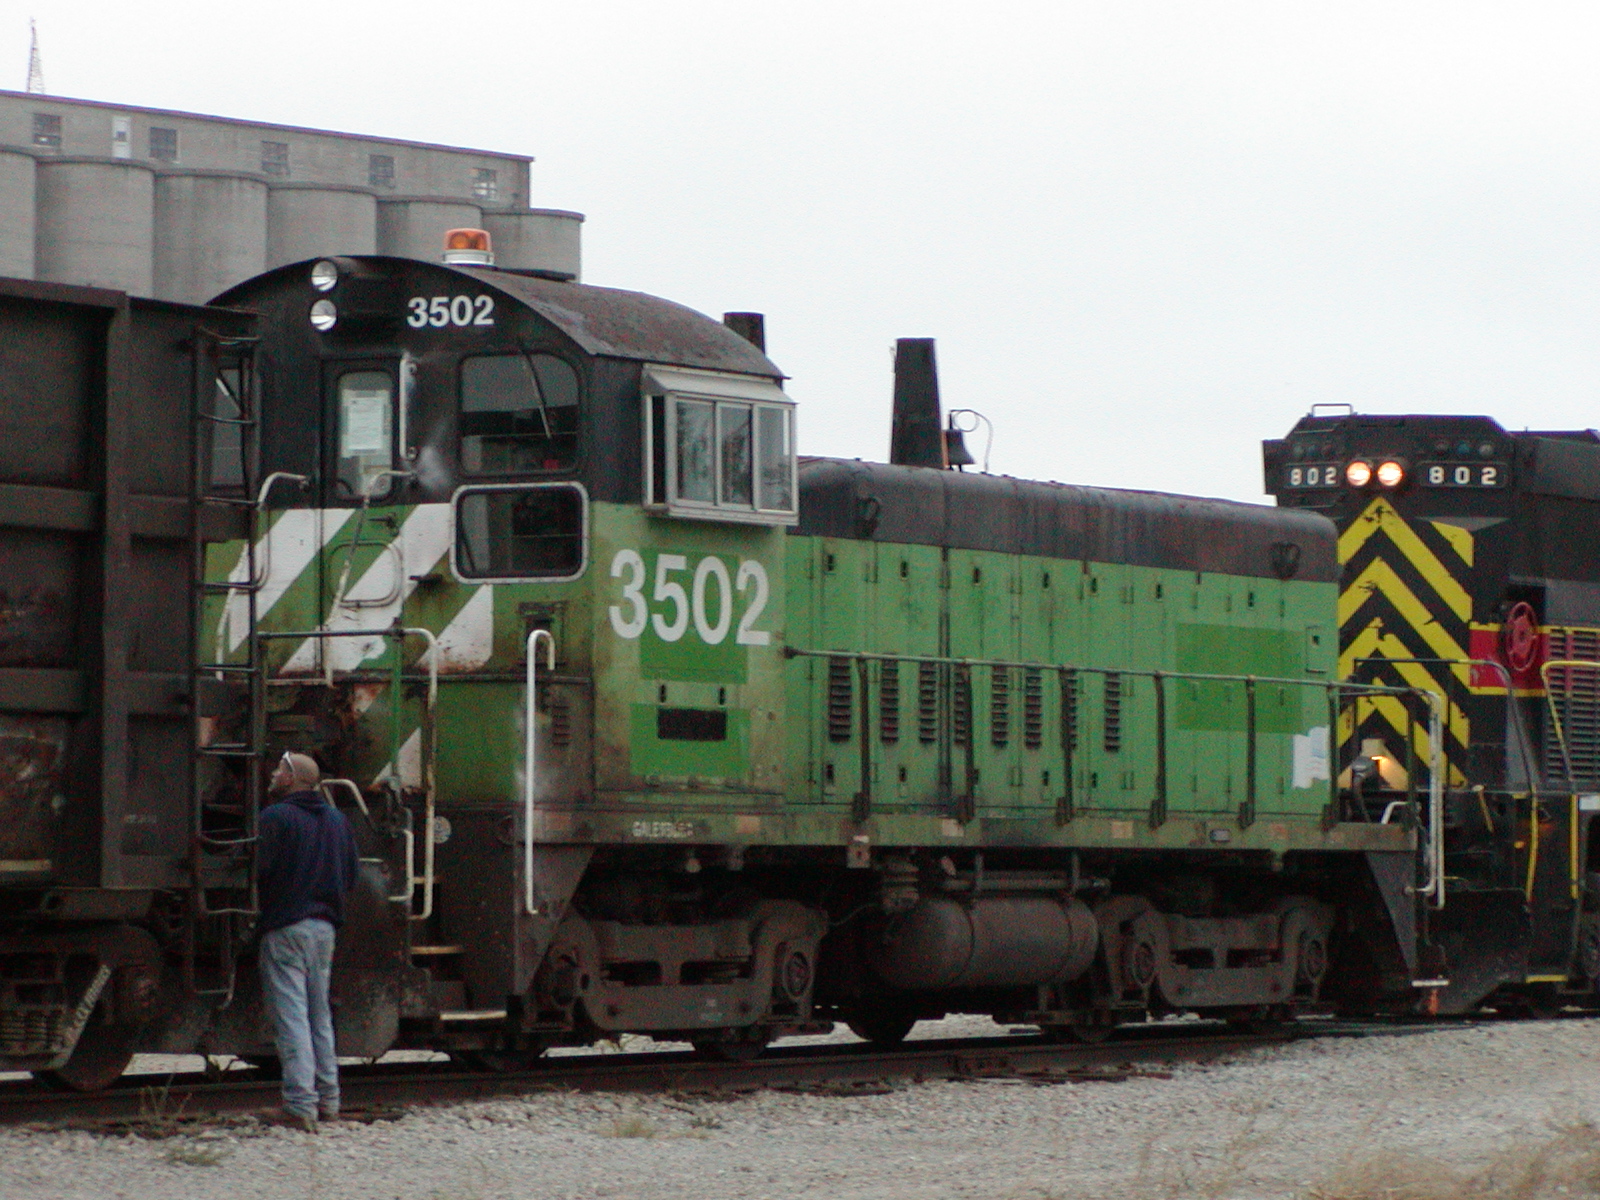 FS 3502, an ex-BN SW1200, makes its way over to the CN interchange on its trip from Silvis to Ida Grove.  Taken 19-Oct-2004